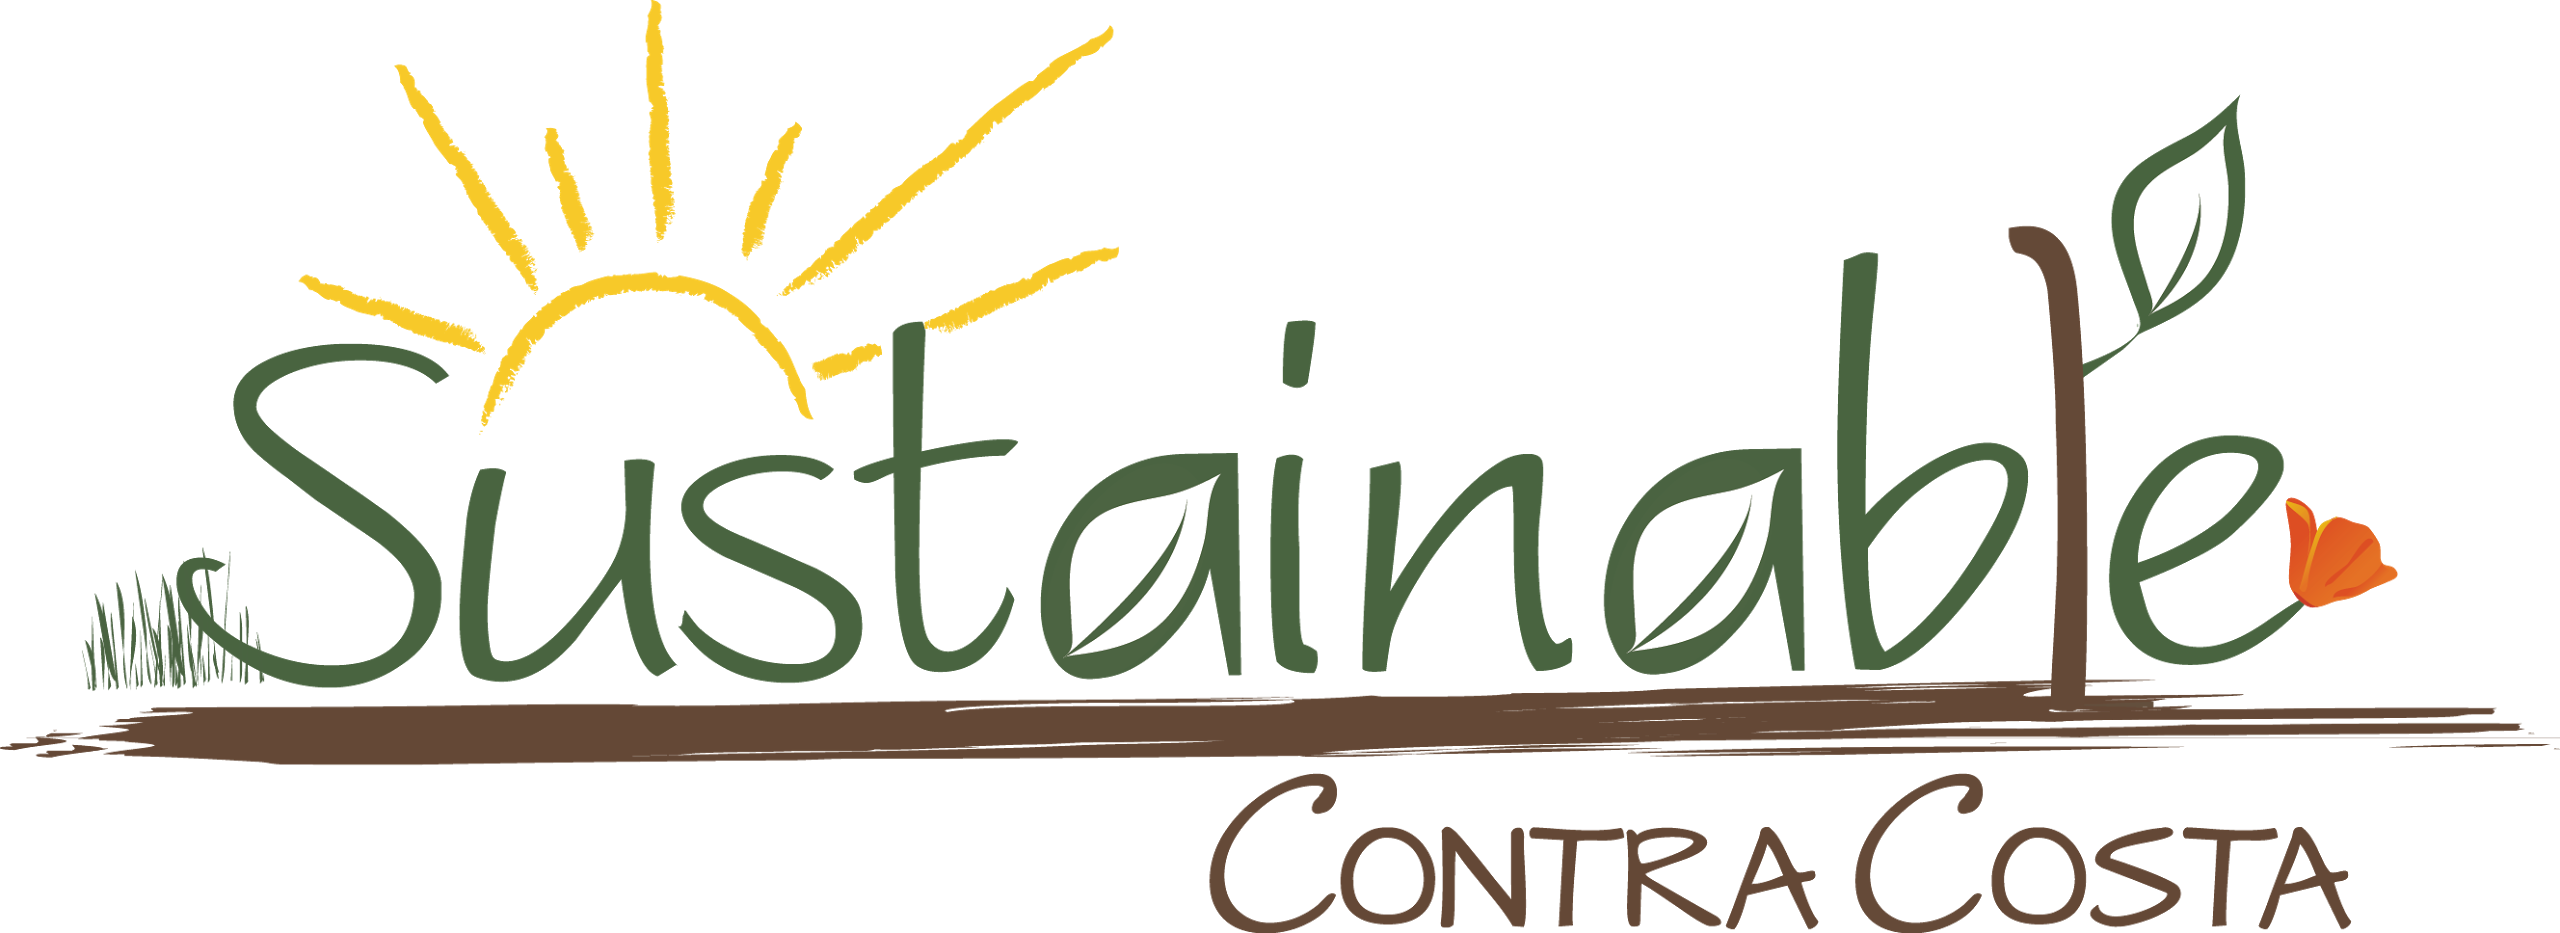 logo, says Sustainable Contra Costa, shows illustration of garden soil, plant, flower, sunshine